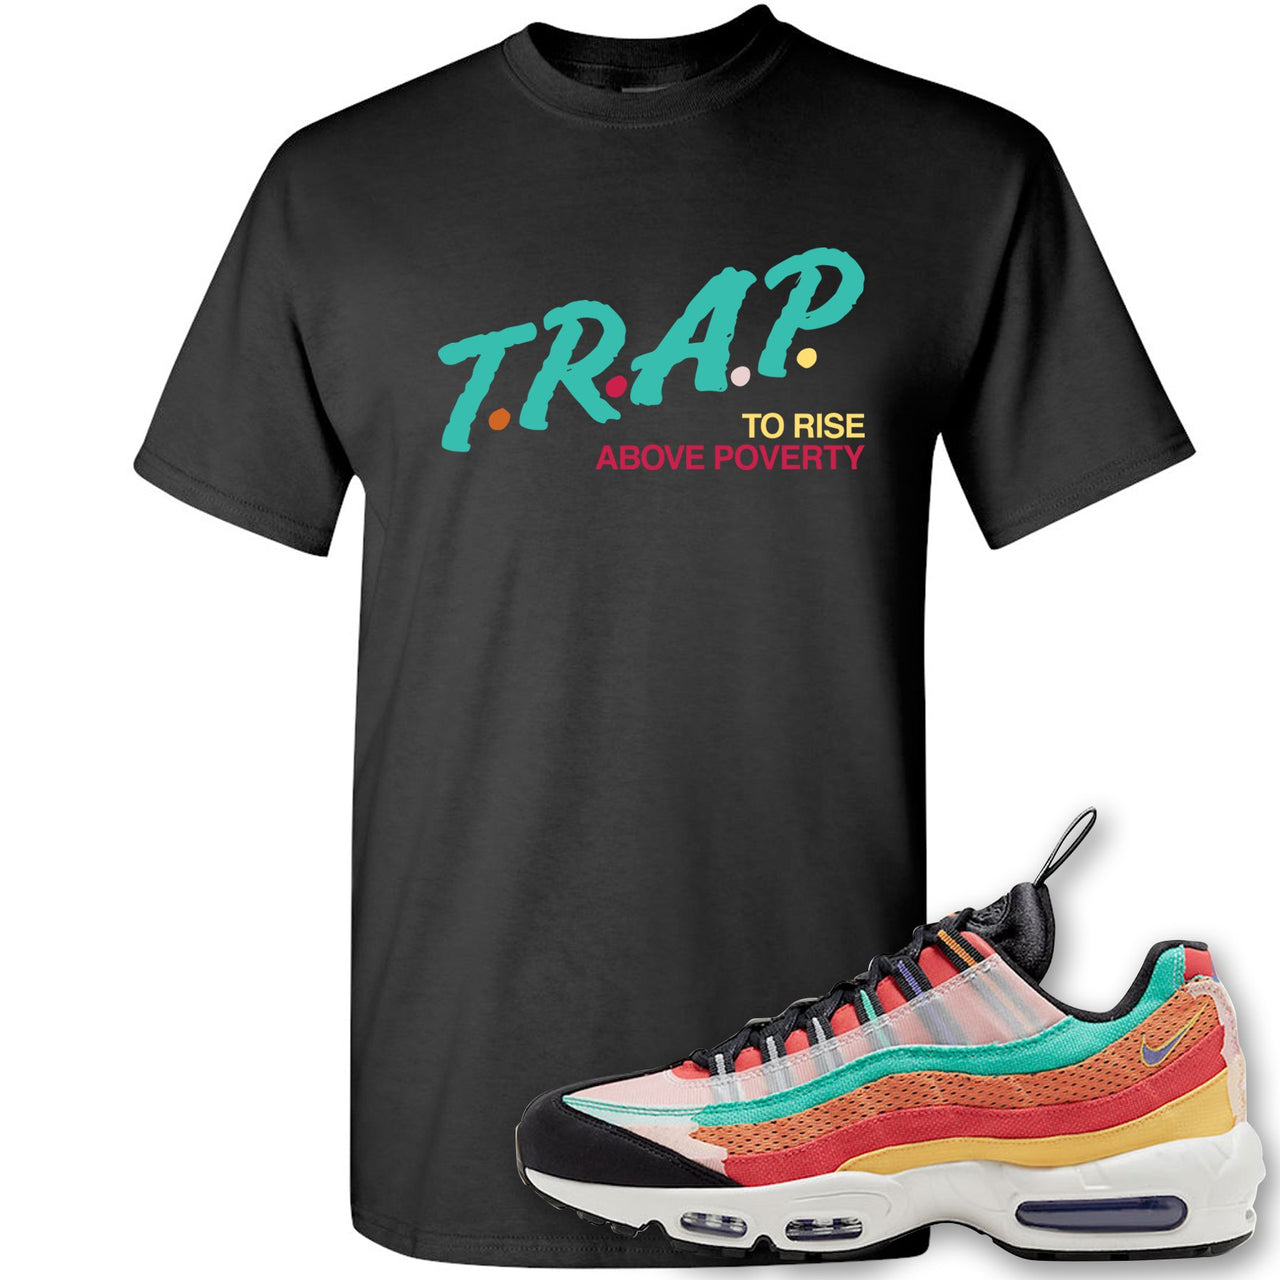 Air Max 95 Black History Month Sneaker Black T Shirt | Tees to match Nike Air Max 95 Black History Month Shoes | Trap To Rise Above Poverty